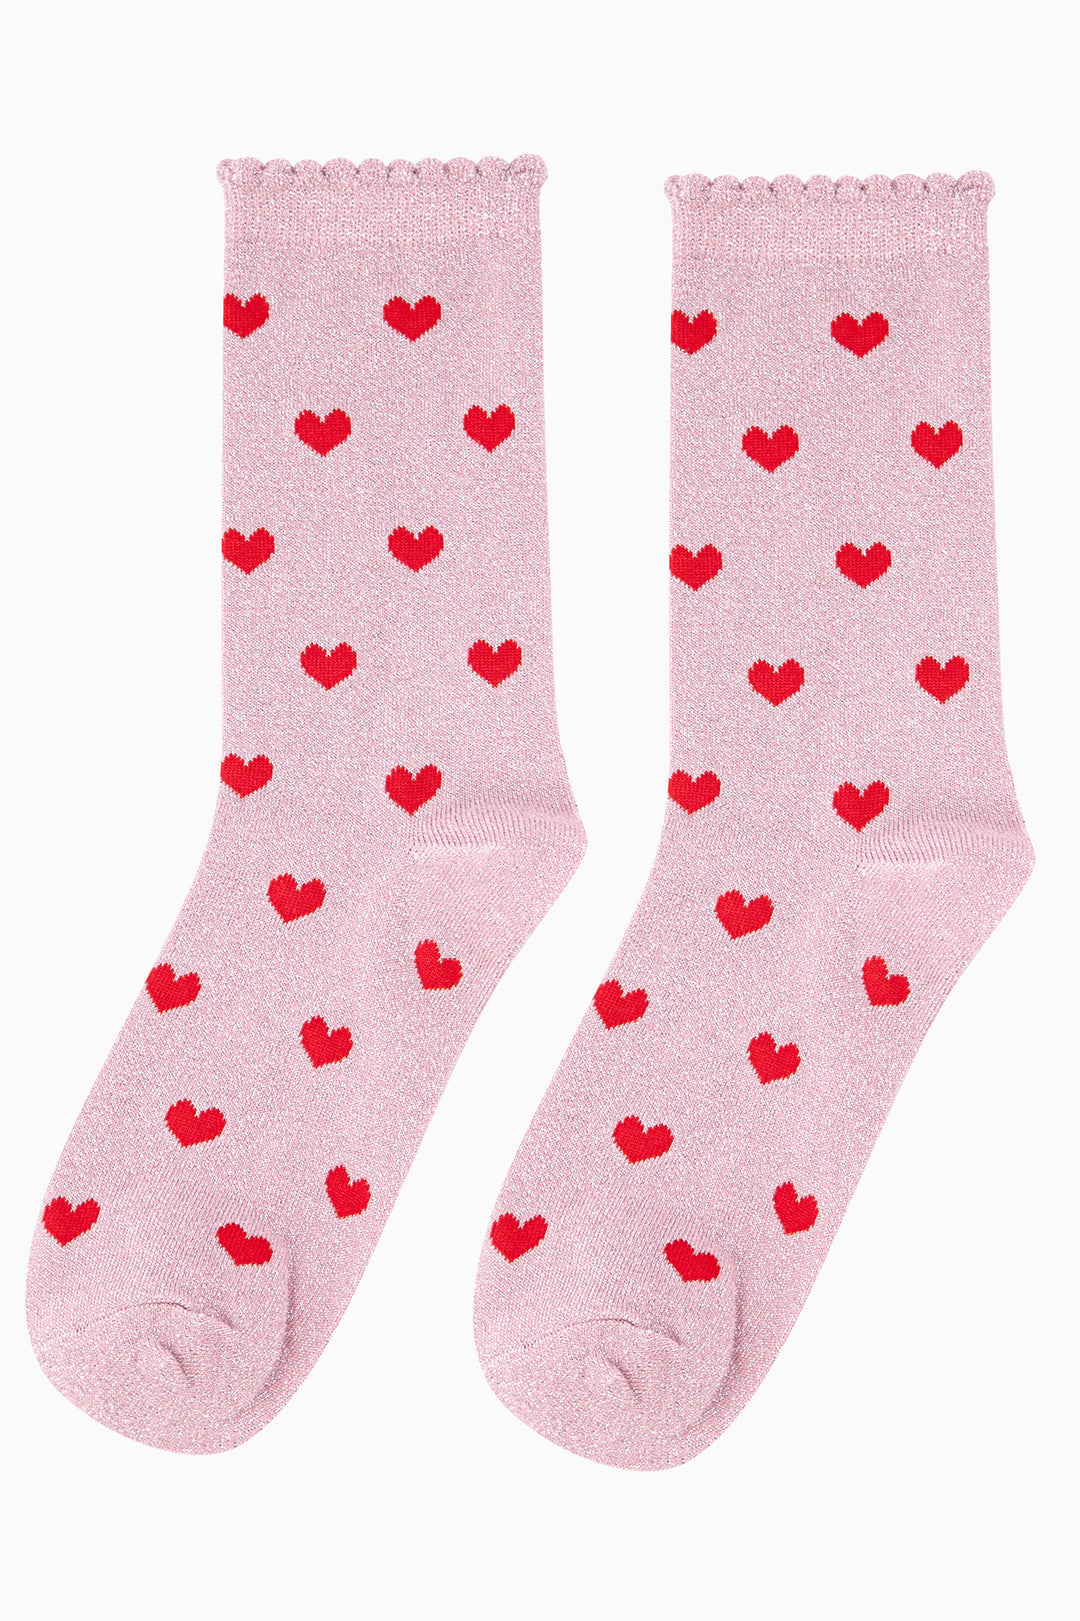 pink glitter socks with red love hearts, scalloped cuff and an all over sparkle